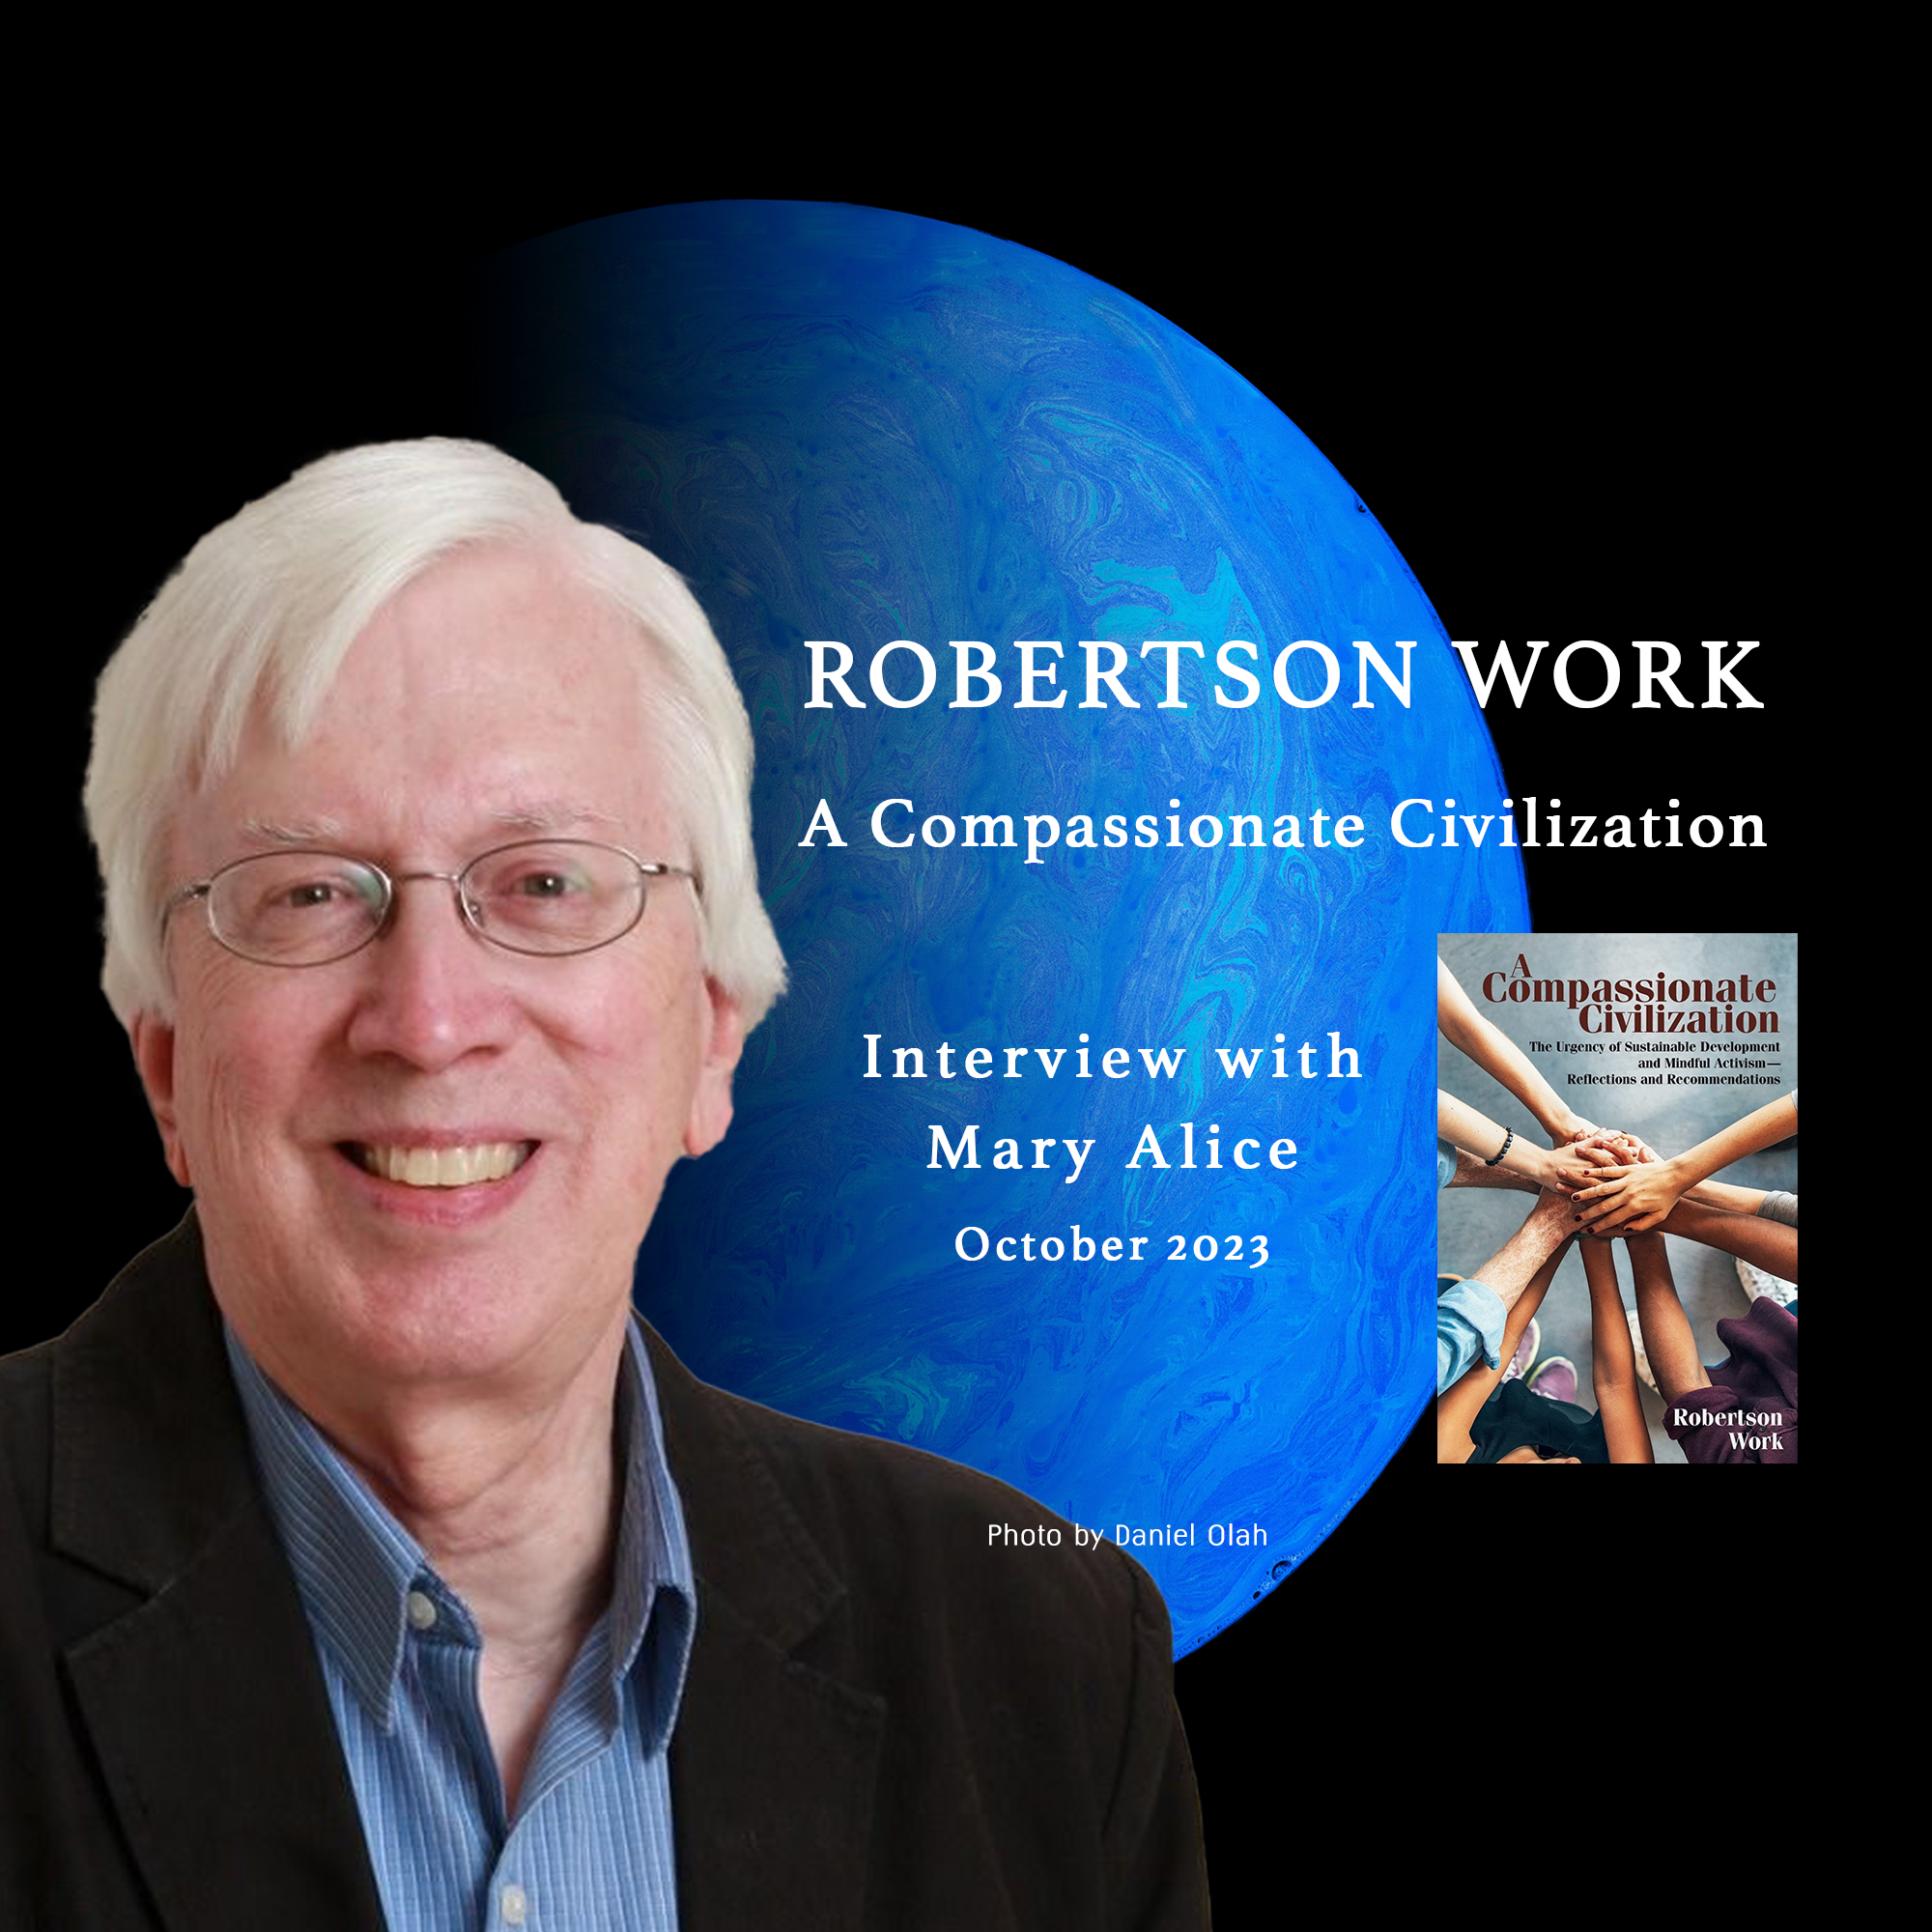 Mary Alice's Interview with Robertson Work: A Compassionate Civilization